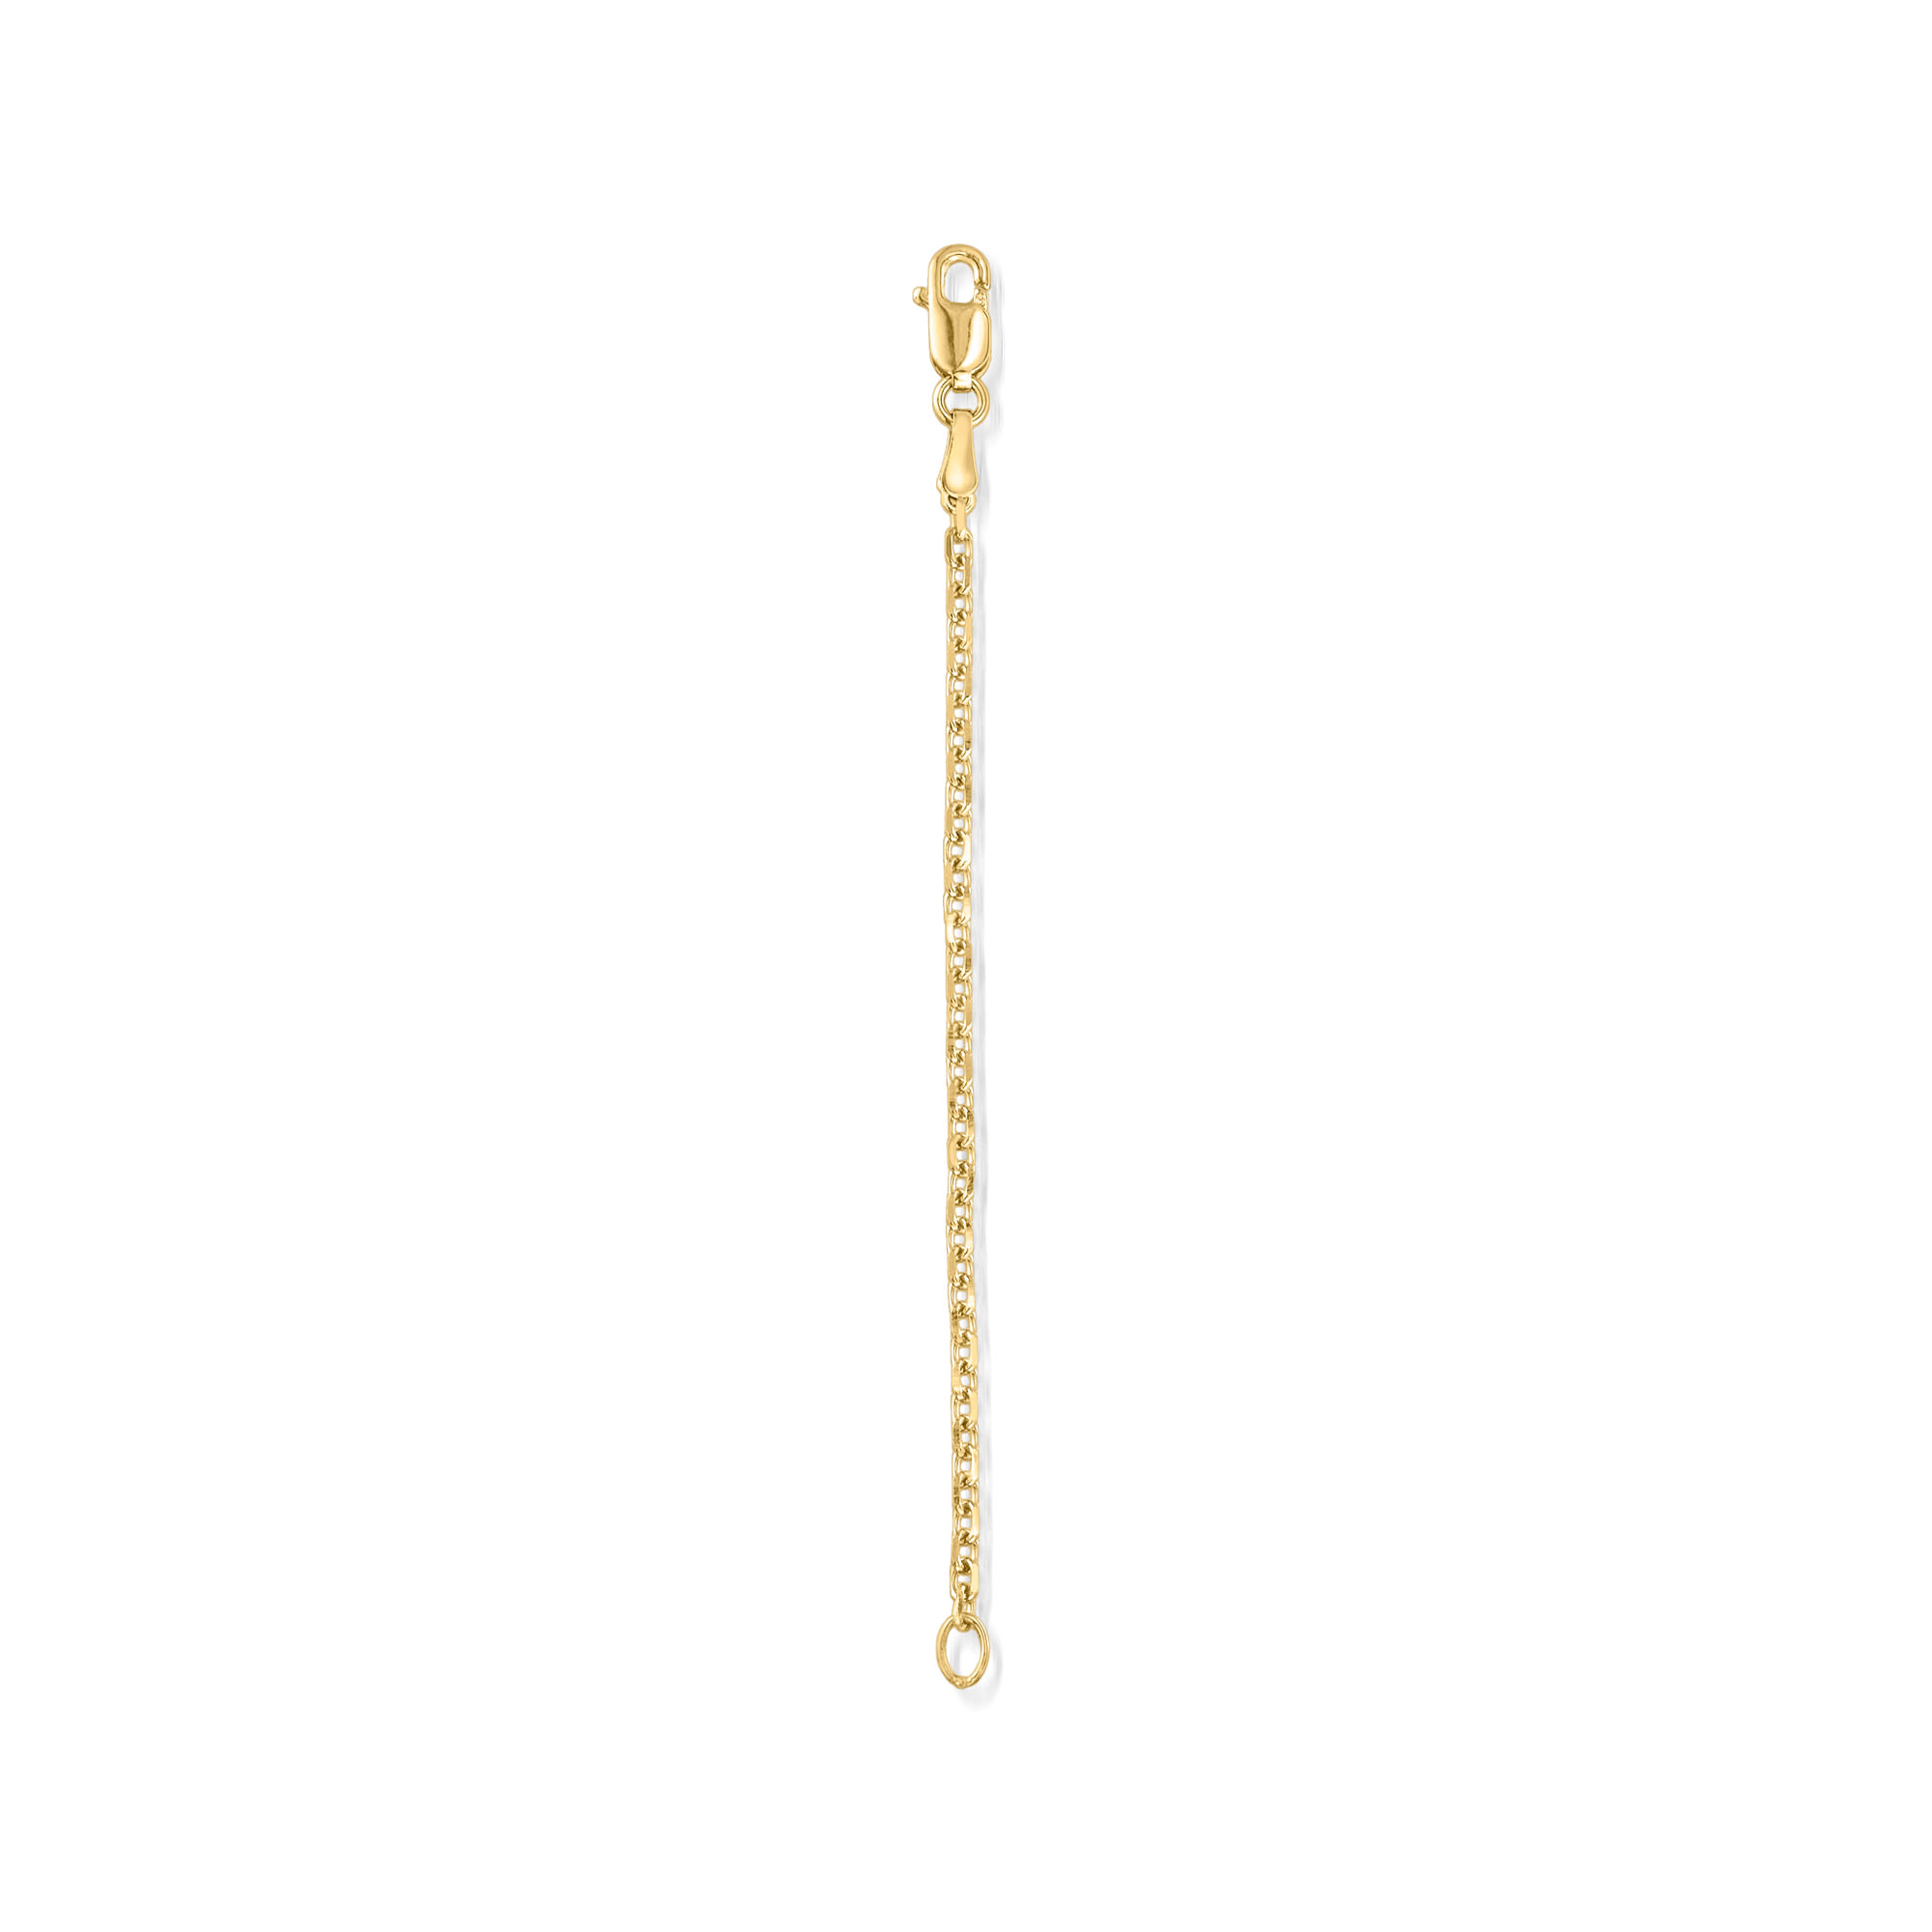 14k Solid Gold Extender For Necklace or Bracelet,Extension Link Cable Chain  2.5 - Simpson Advanced Chiropractic & Medical Center